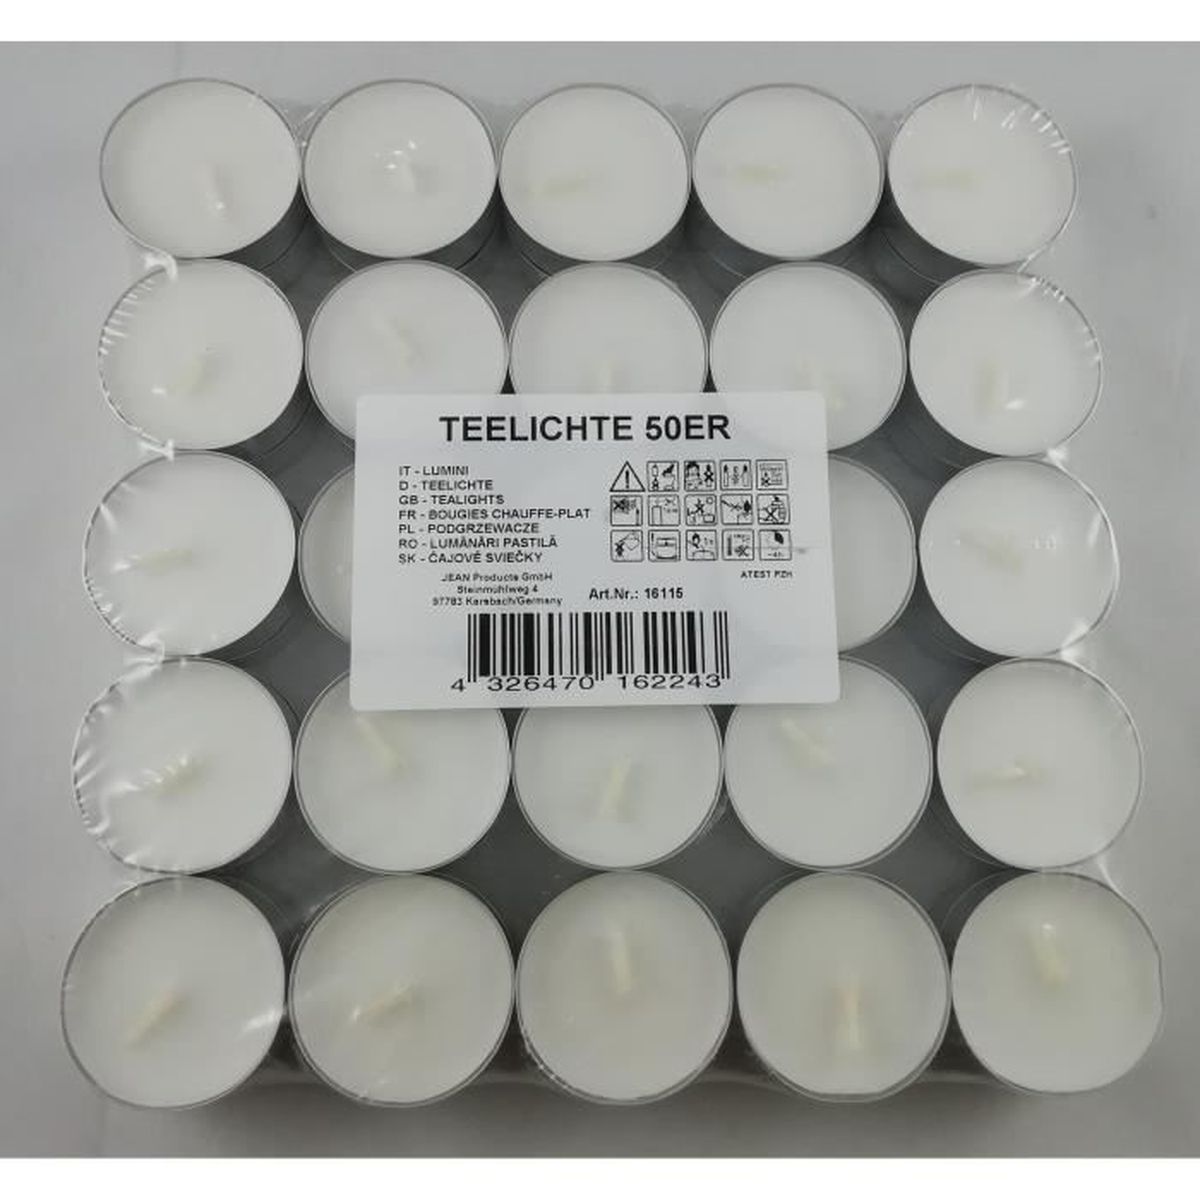 100 Petites Bougies Chauffe Plat Durée 4 Heures Candles Blanches Lot Sac NEUF